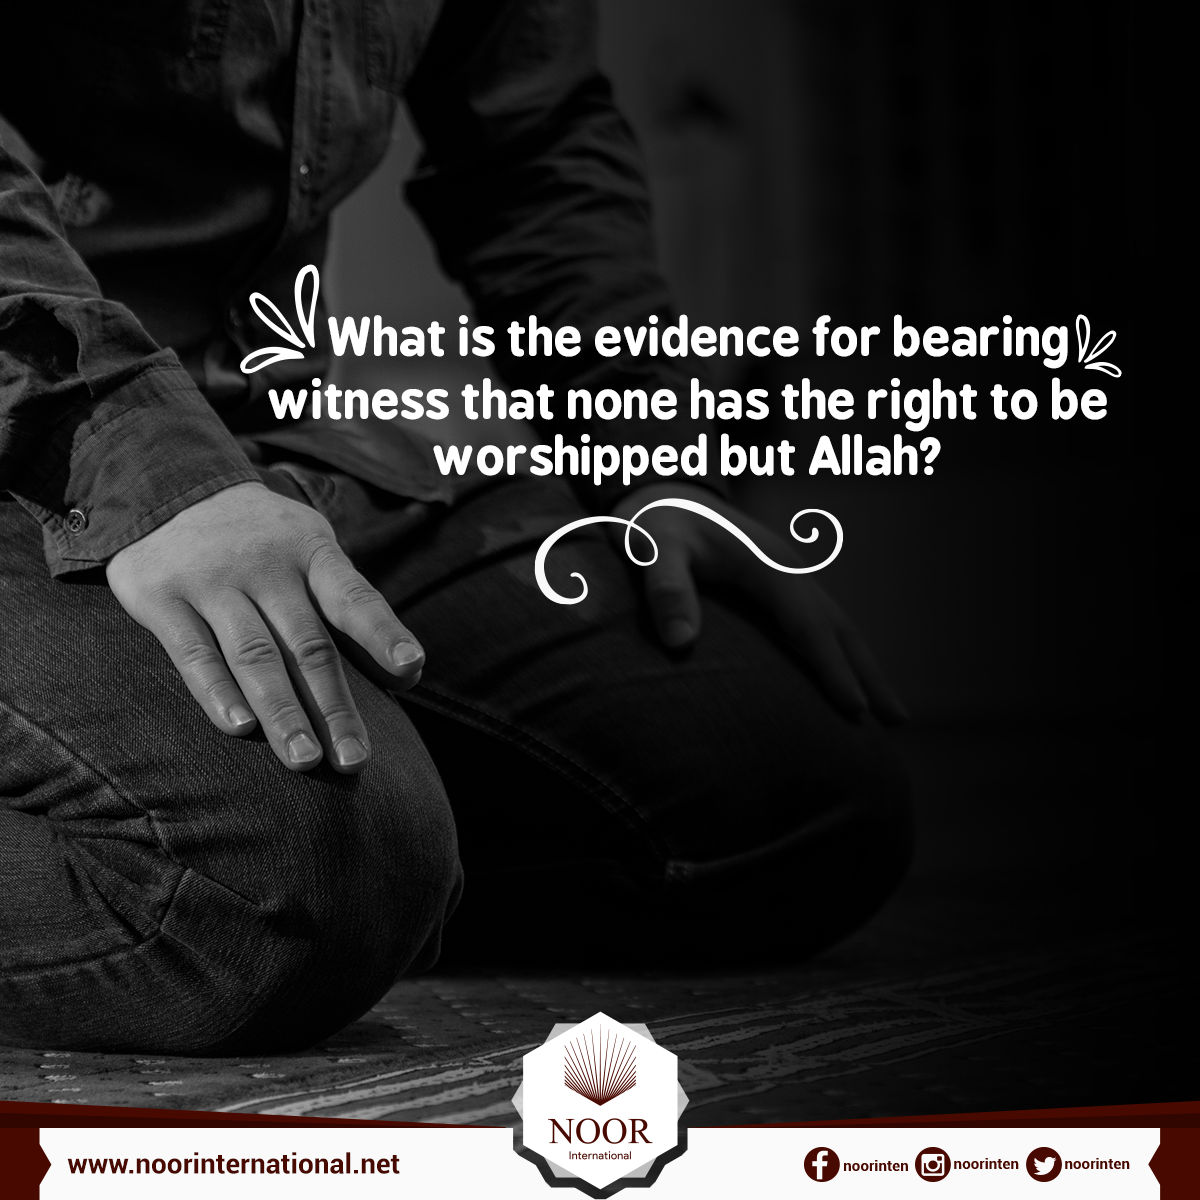 What is the evidence for bearing witness that none has the right to be worshipped but Allah?